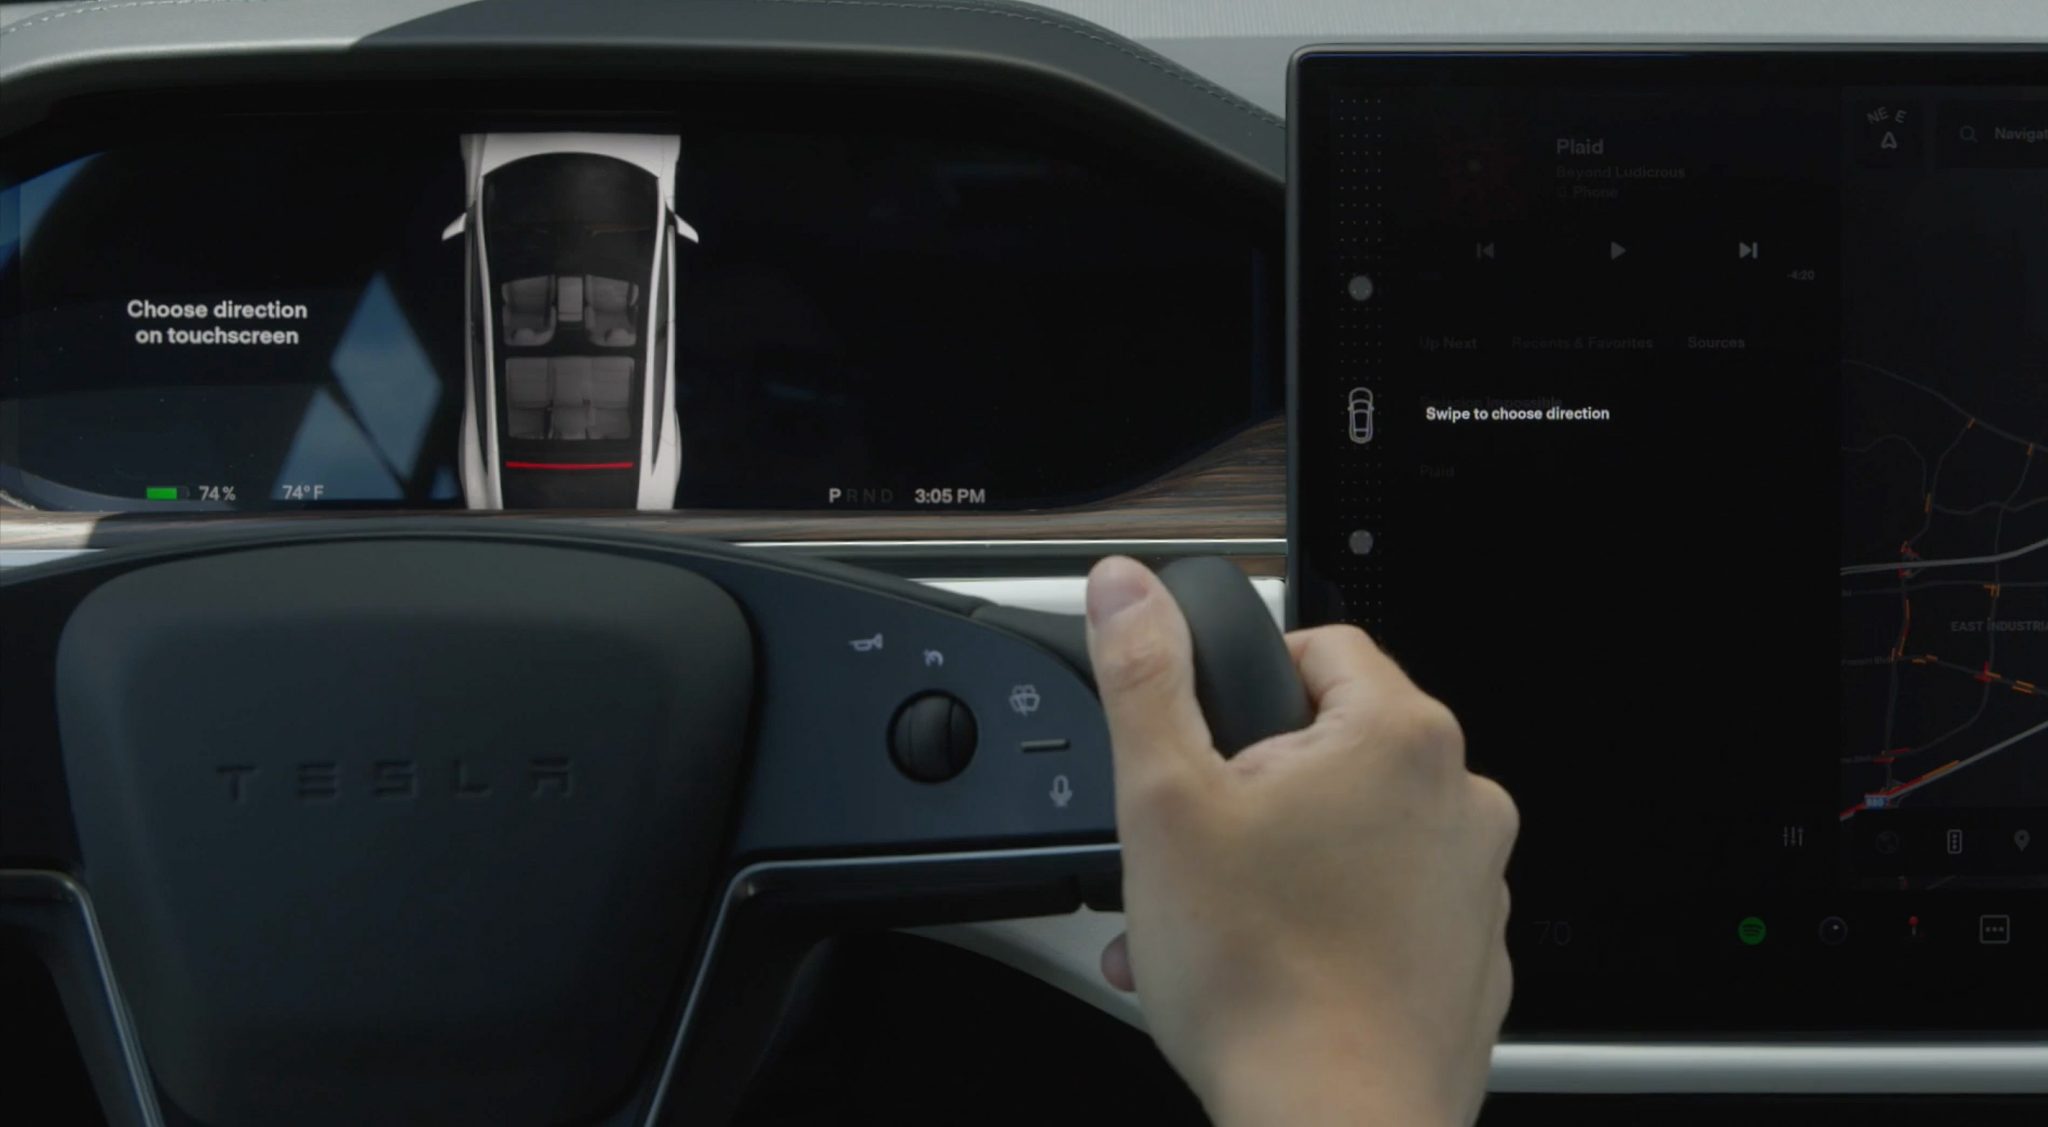 Tesla Model S Plaid Owner's Manual reveals how "Auto Shift" works